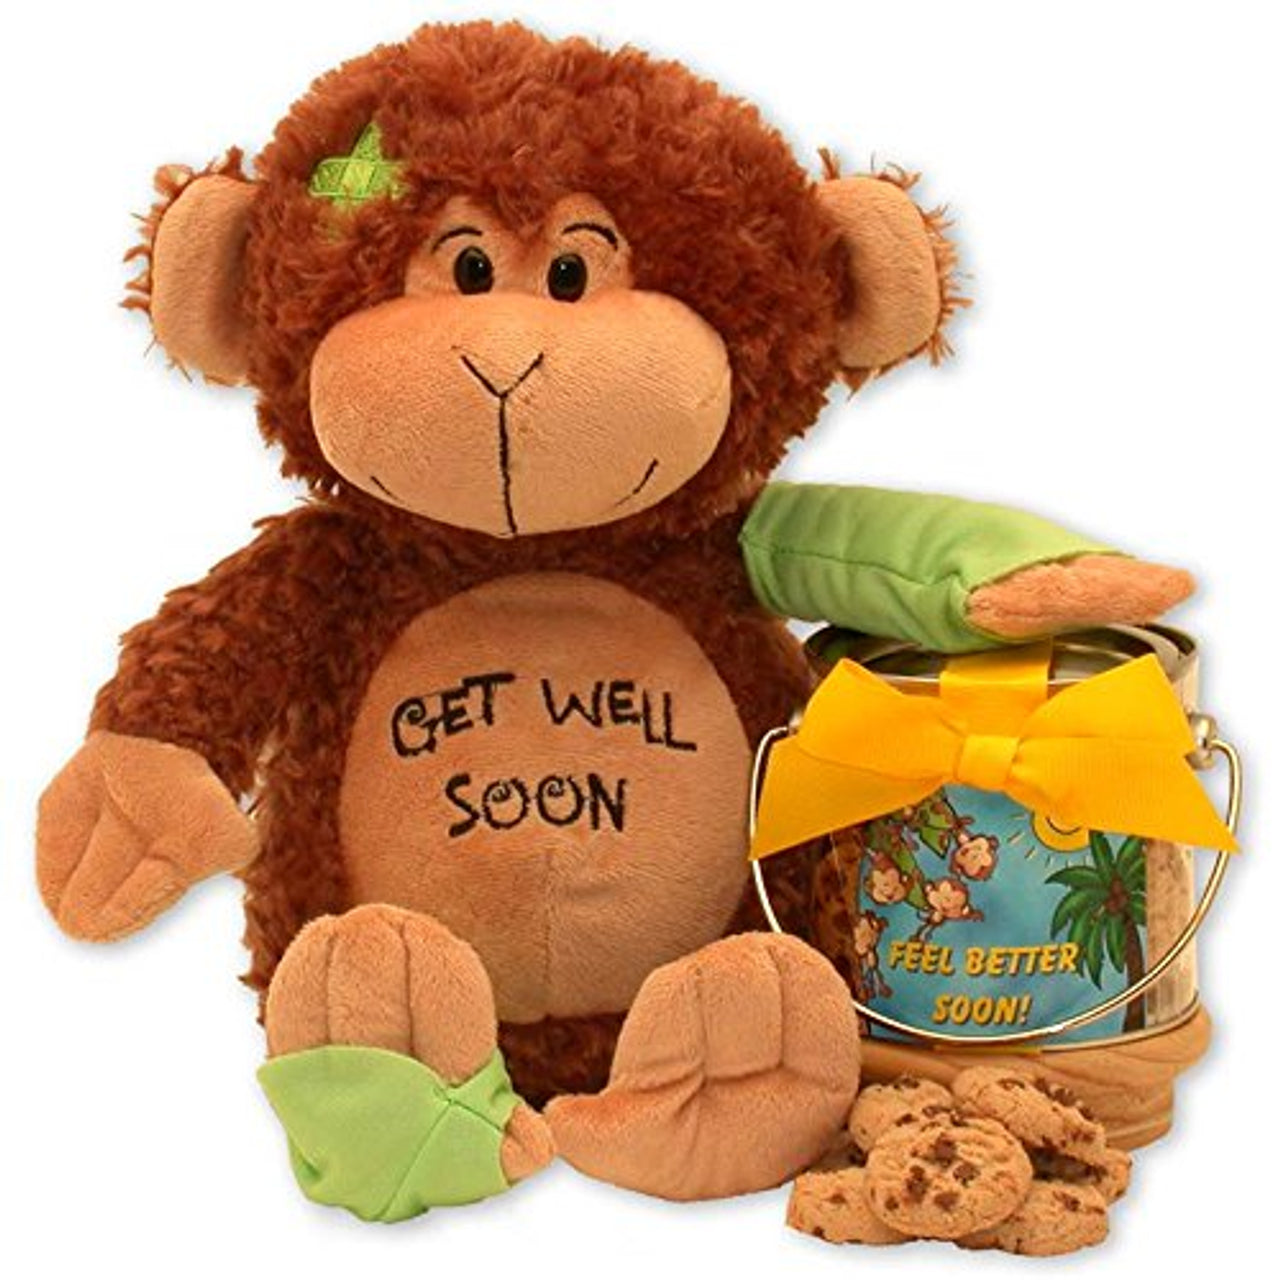 Get Well Soon Teddy Bear & Cookie Pail - get well soon basket - get well soon gifts for women - get well soon gifts for men